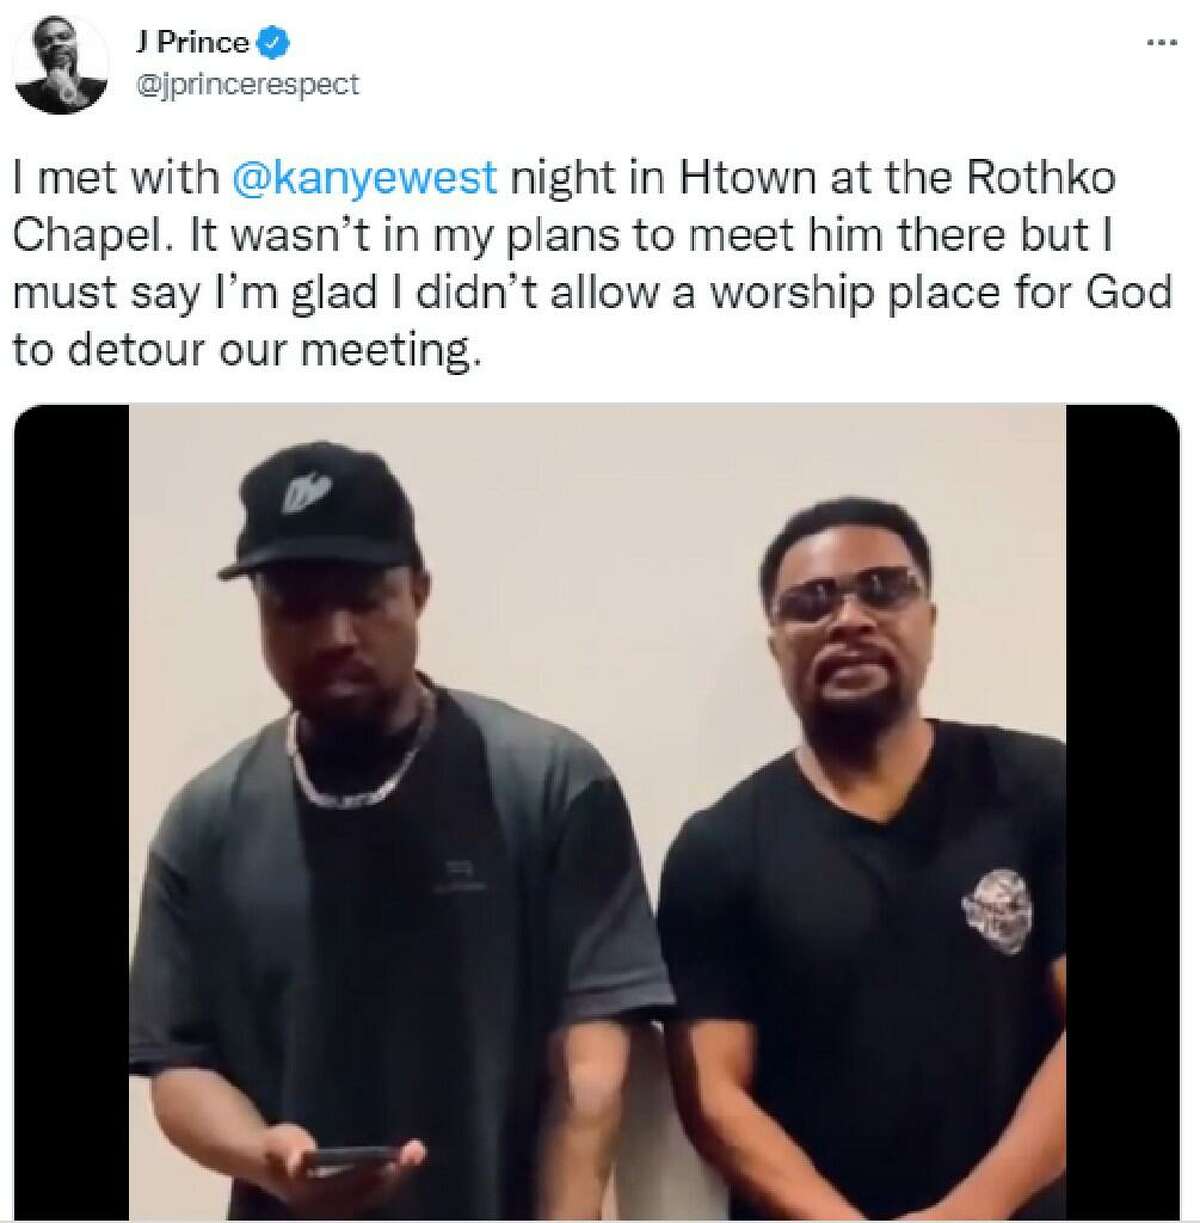 Houston hip hop music mogul J. Prince (right) is working to end one of hip hop’s biggest hip-hop beefs. In a video posted Nov. 8, 2021, the CEO of Houston-based Rap-a-Lot Records stood beside Kanye West in the Rothko Chapel as the musician announced his desire to end his rift with fellow rapper Drake